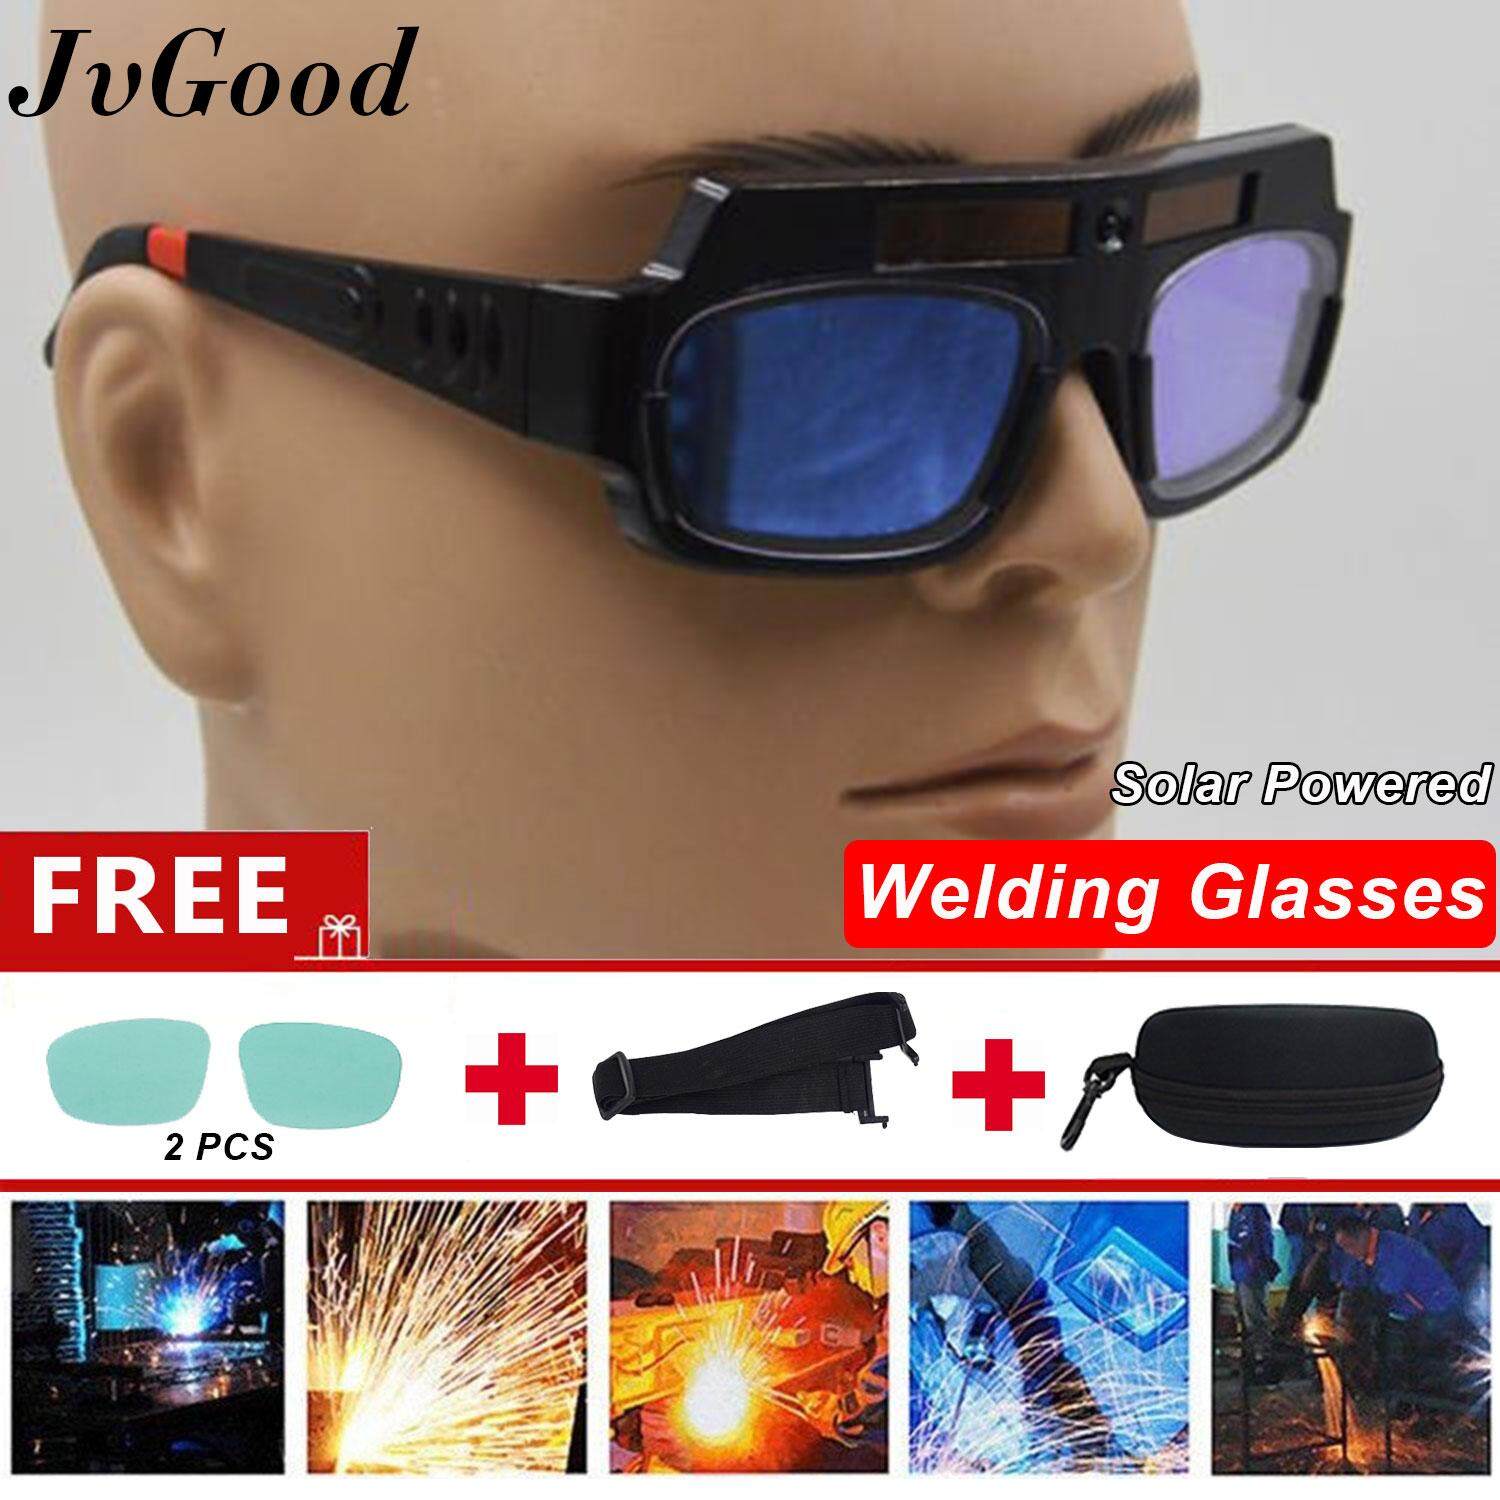 Jvgood Solar Powered Safety Goggles Welding Glasses Eye Protection Glasses Eyes Goggles Welder Glasses Auto Darkening Welding Eyewear With Free Gift Lazada